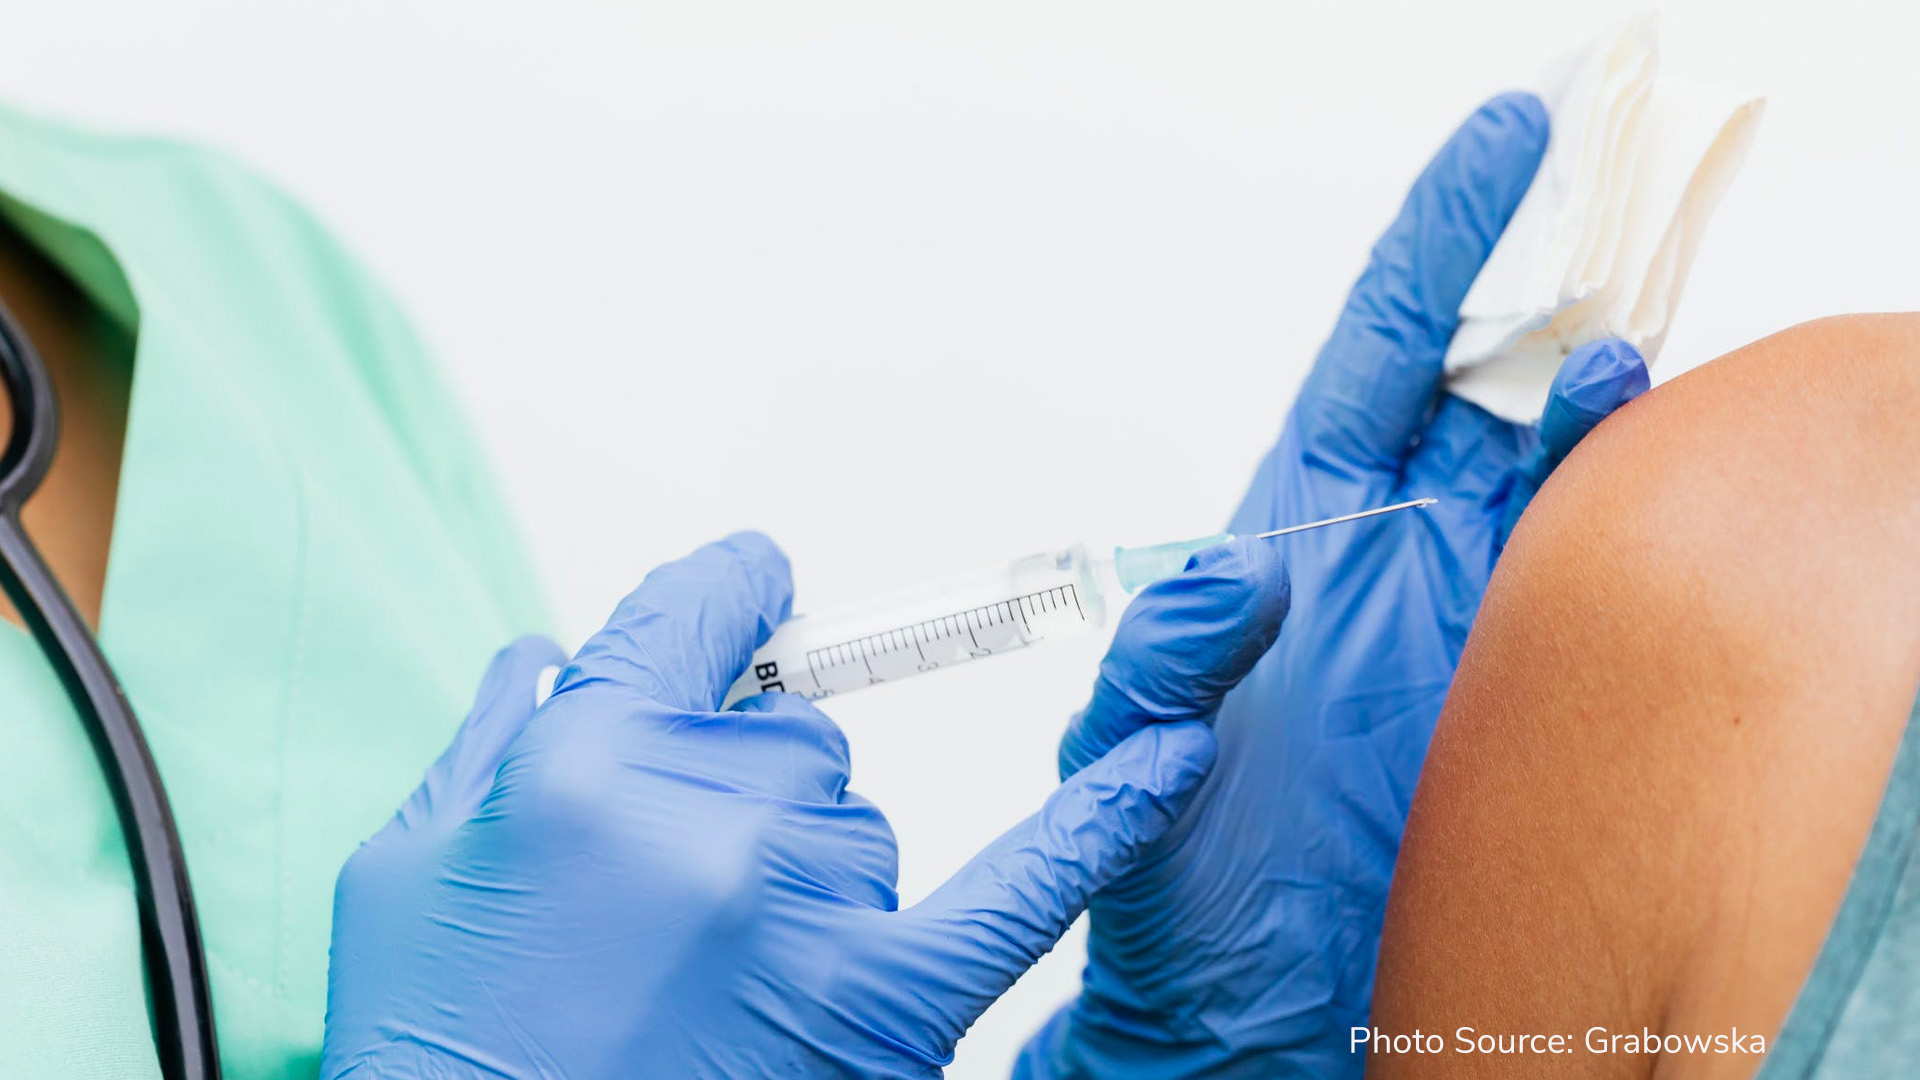 Europe could achieve herd immunity by July